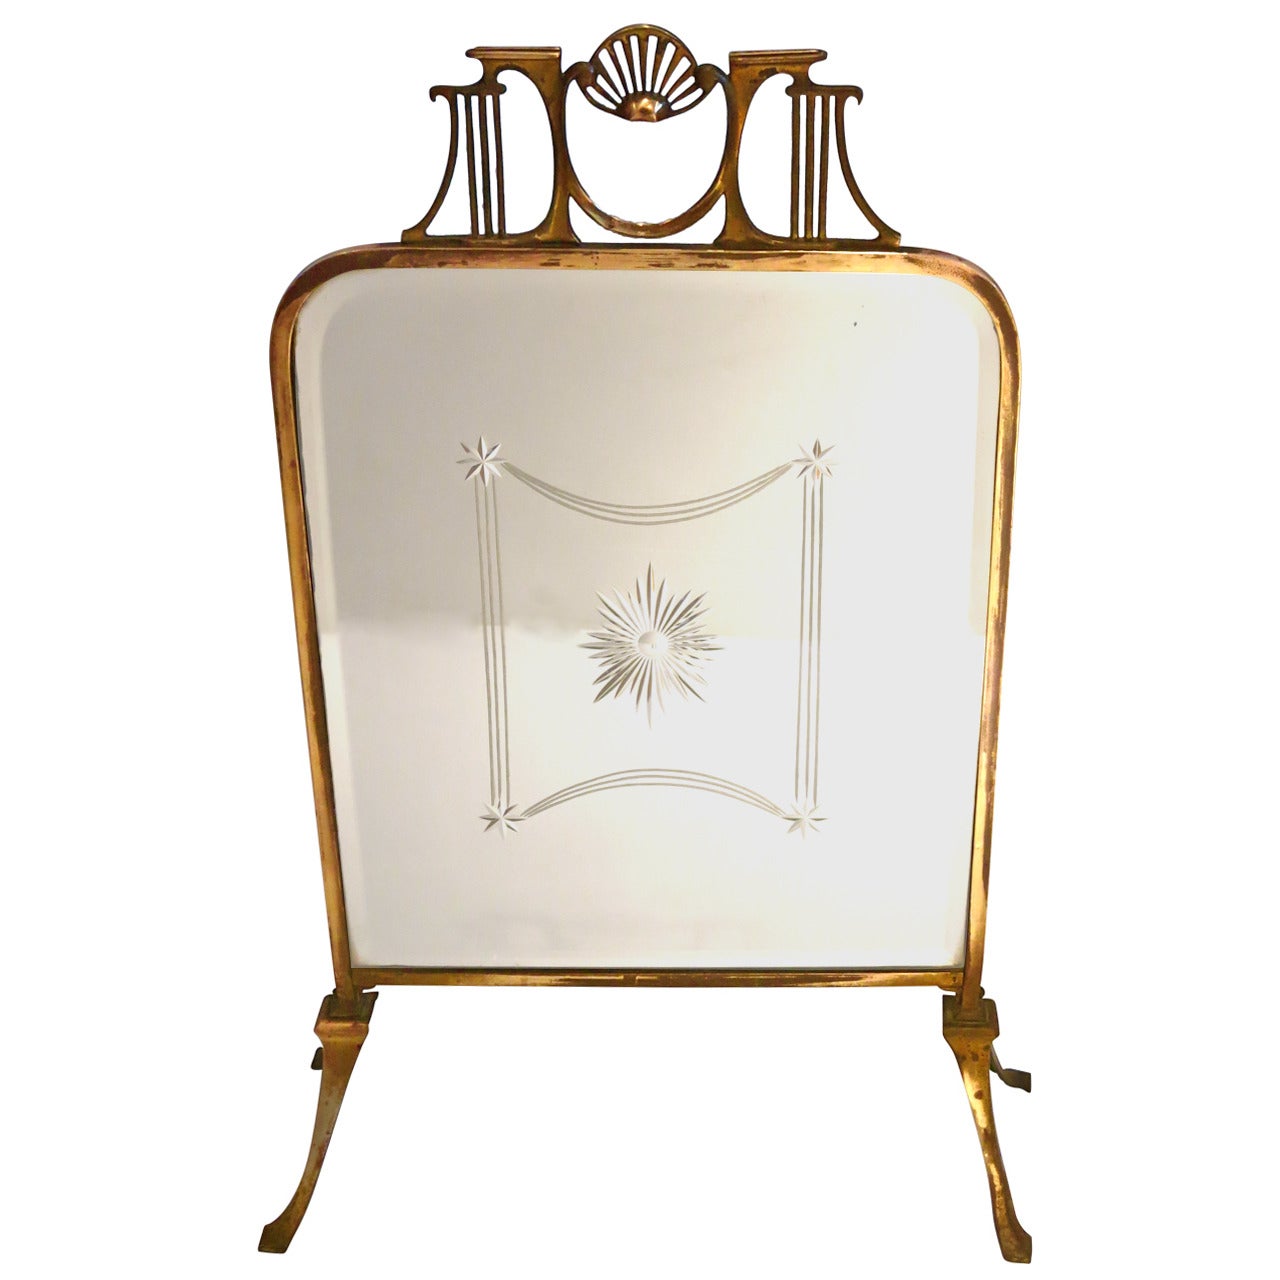 Art Nouveau Brass Fire Screen with Beveled Mirror Design Victorian Style